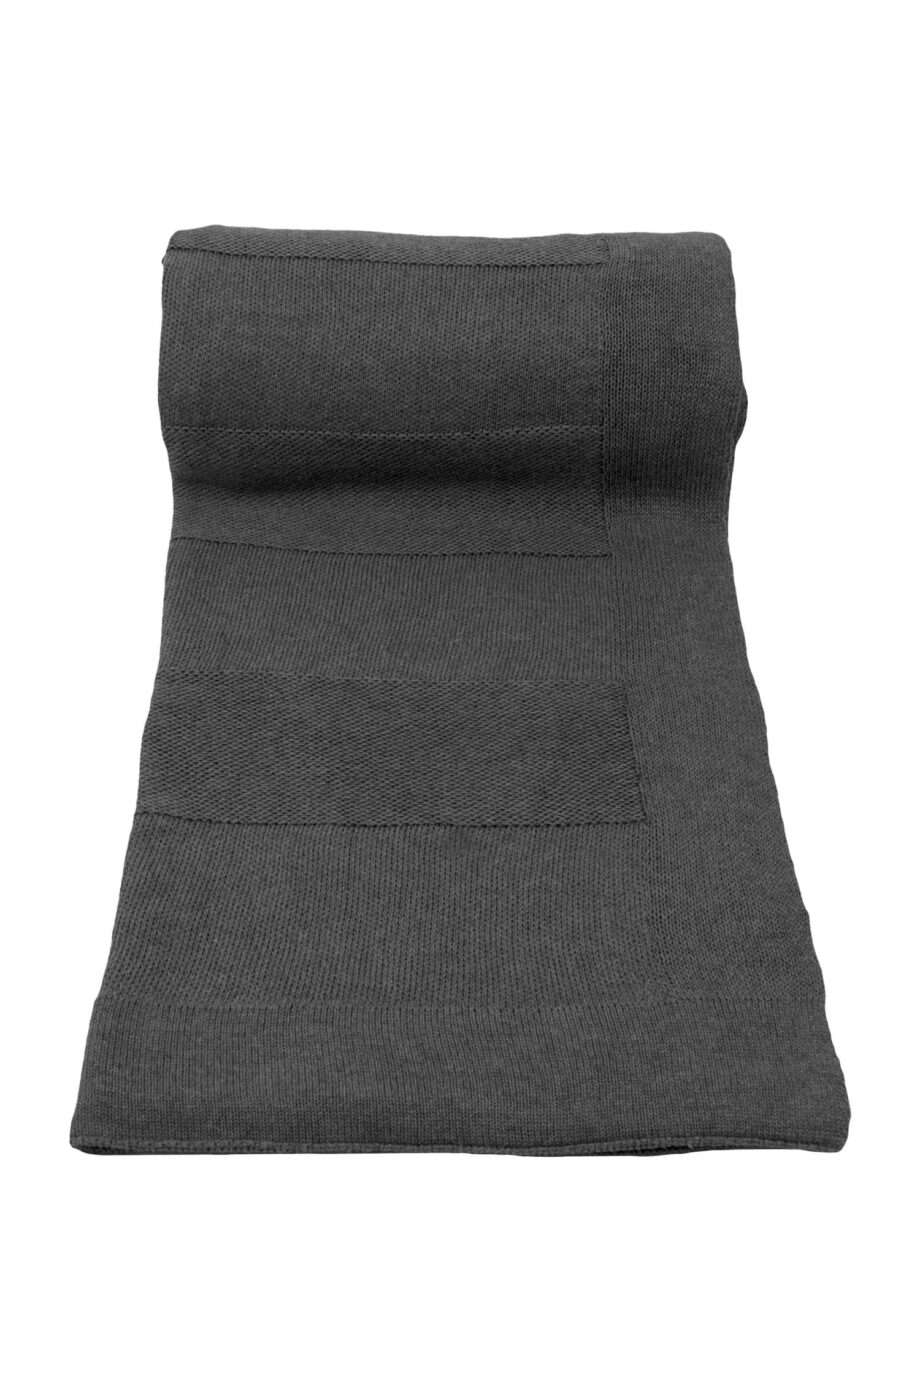 urban anthracite knitted woolen throw large